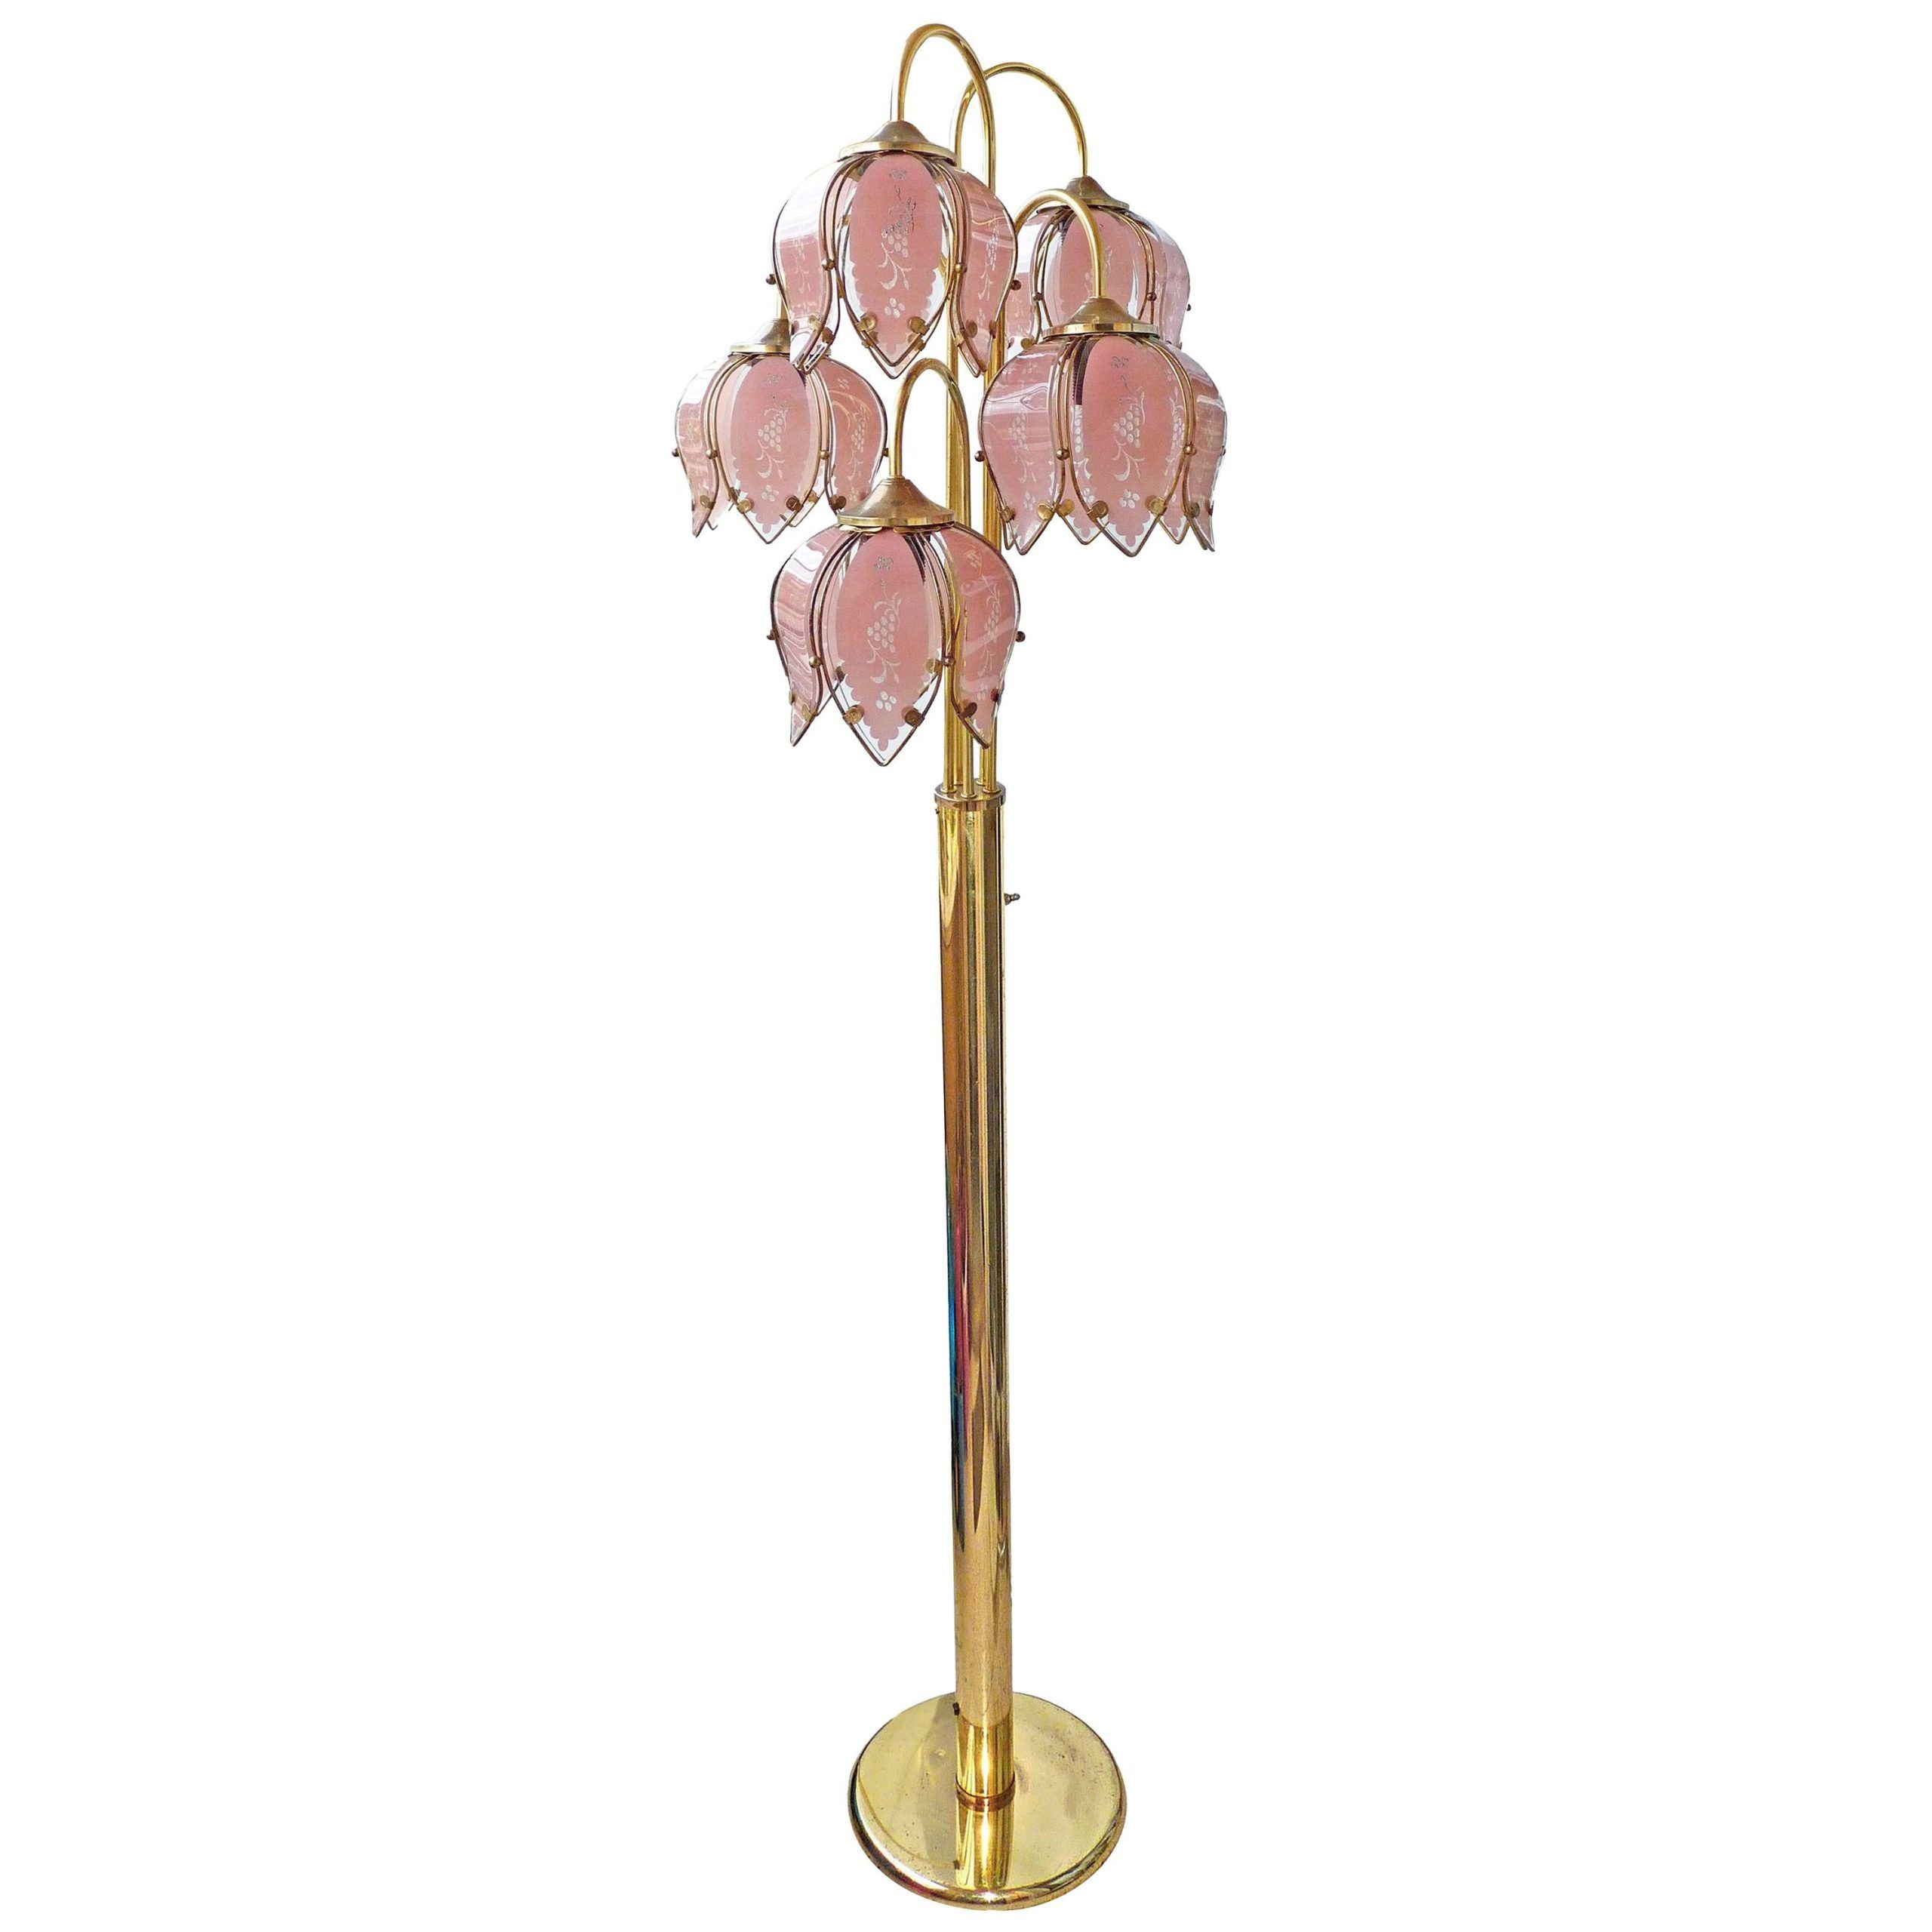 Modernist Hollywood Regency Tree Floor Lamp W Murano Pink Glass Flower  Bouquet For Sale At 1stdibs | Flower Floor Lamp, Vintage Flower Lamp,  Hollywood Regency Art Deco Tulip Lamp Intended For Flower Floor Lamps (View 2 of 20)